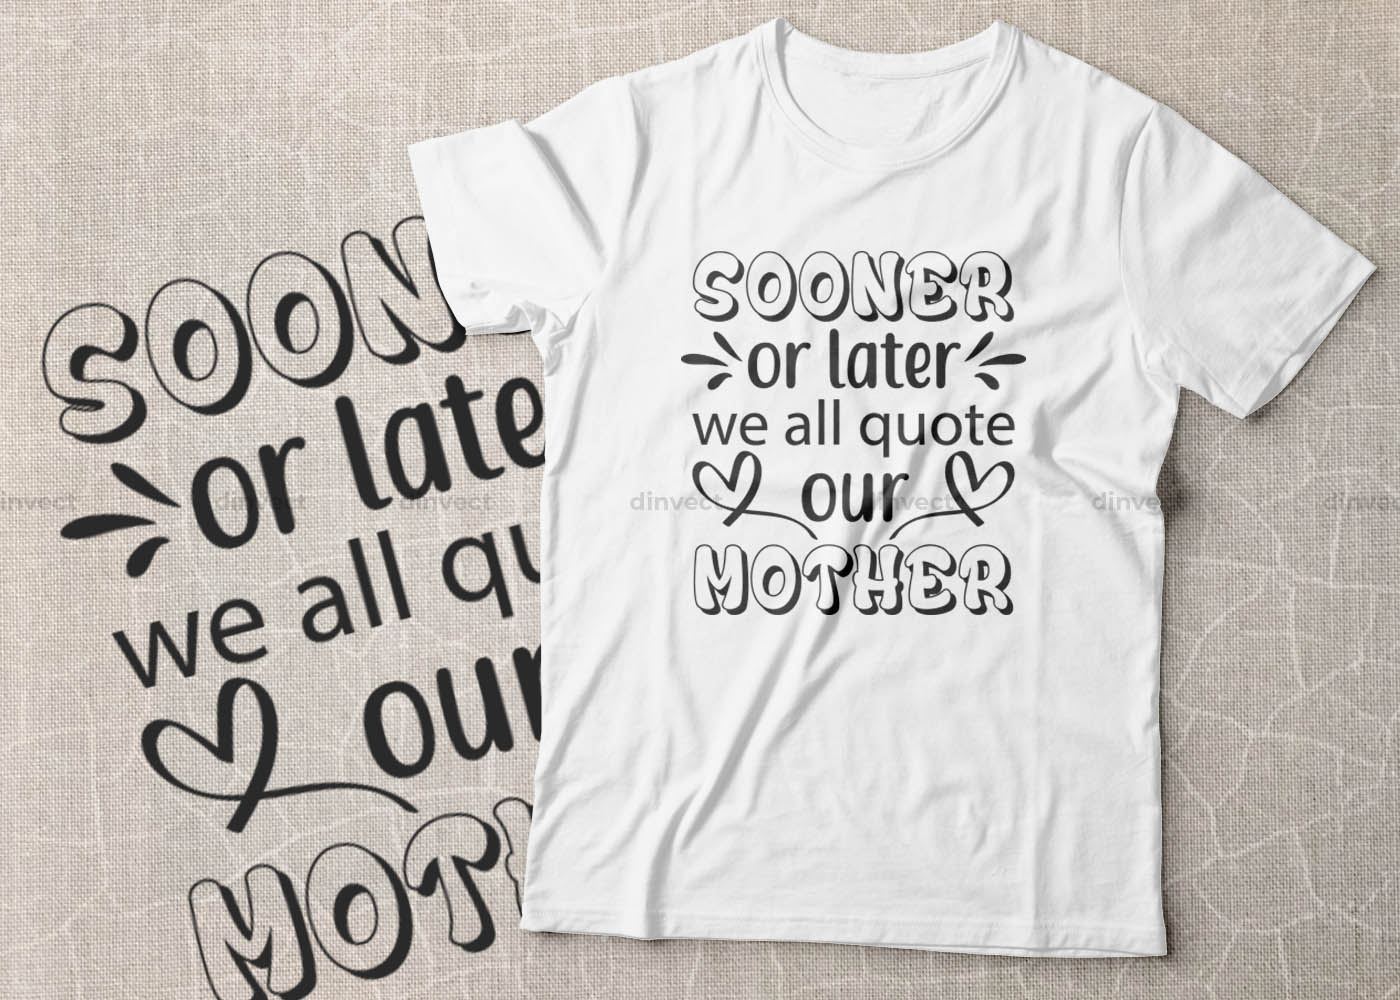 Download Sooner Or Later We All Quote Our Mother Svg Mom Svg Mothers Day T Shirt Design Happy Mothers Day Svg Mother S Day Cricut Files Mom Gift Cameo Vinyl Designs Iron On Decals Cricut